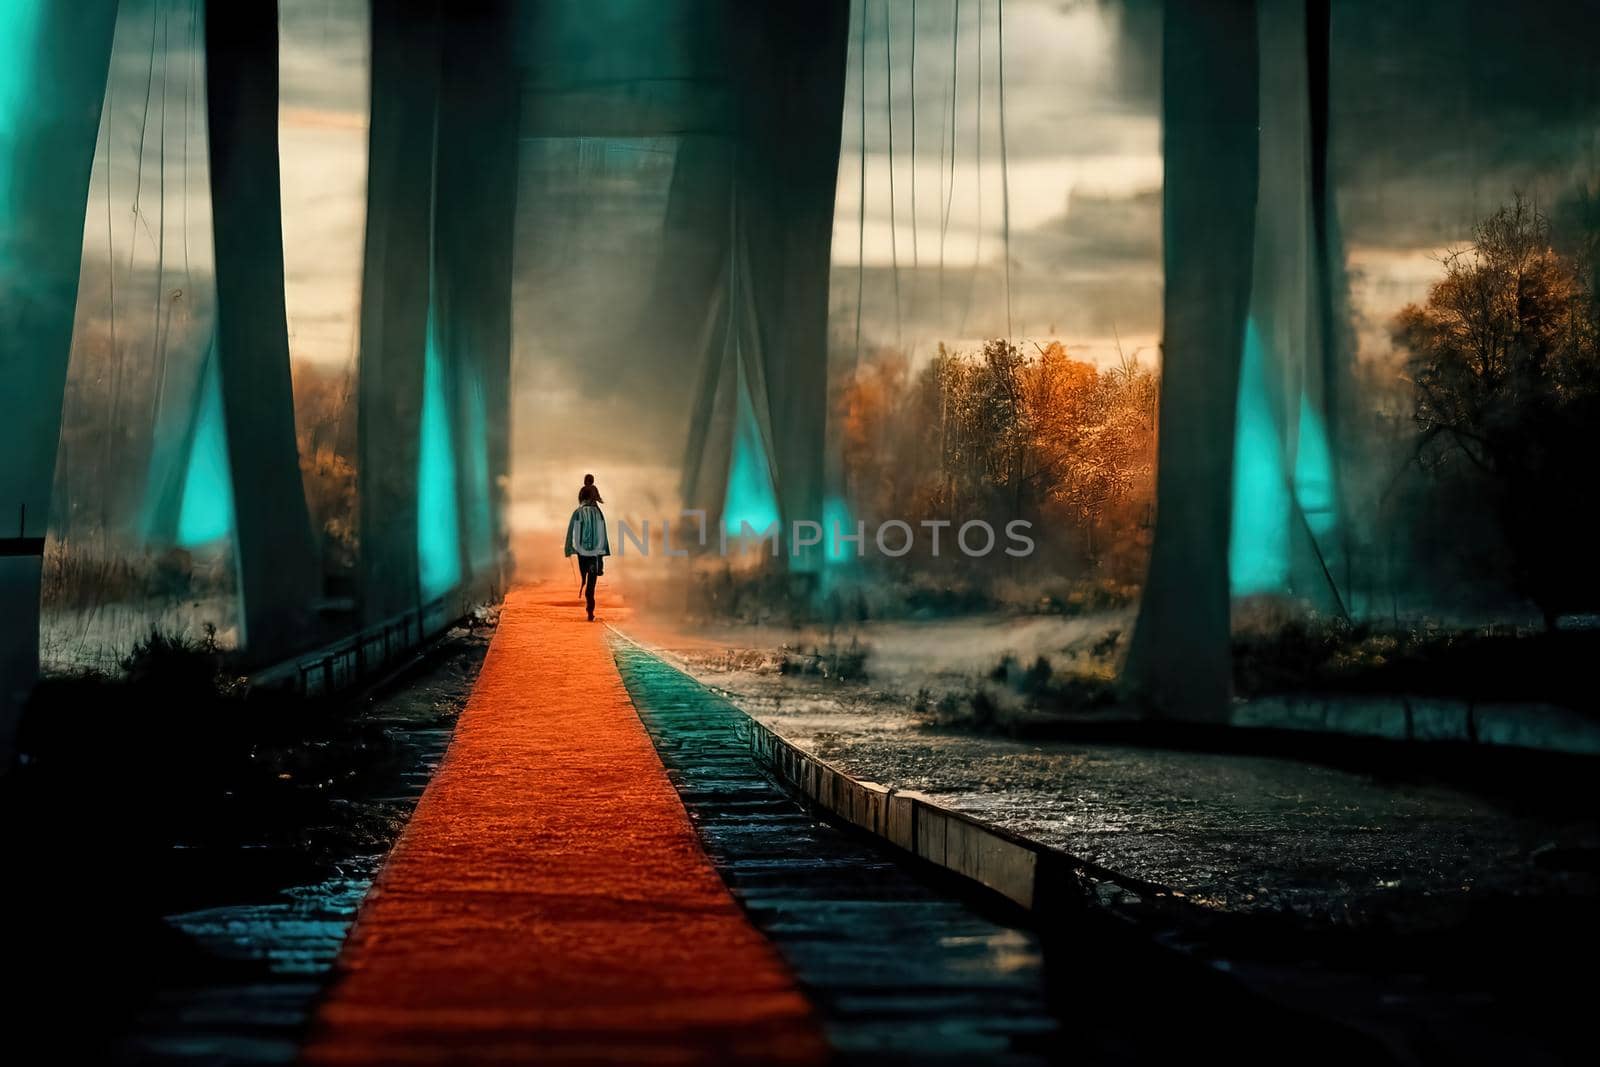 Cinematic scenery view, teal and orange path, 3d Illustration by Farcas